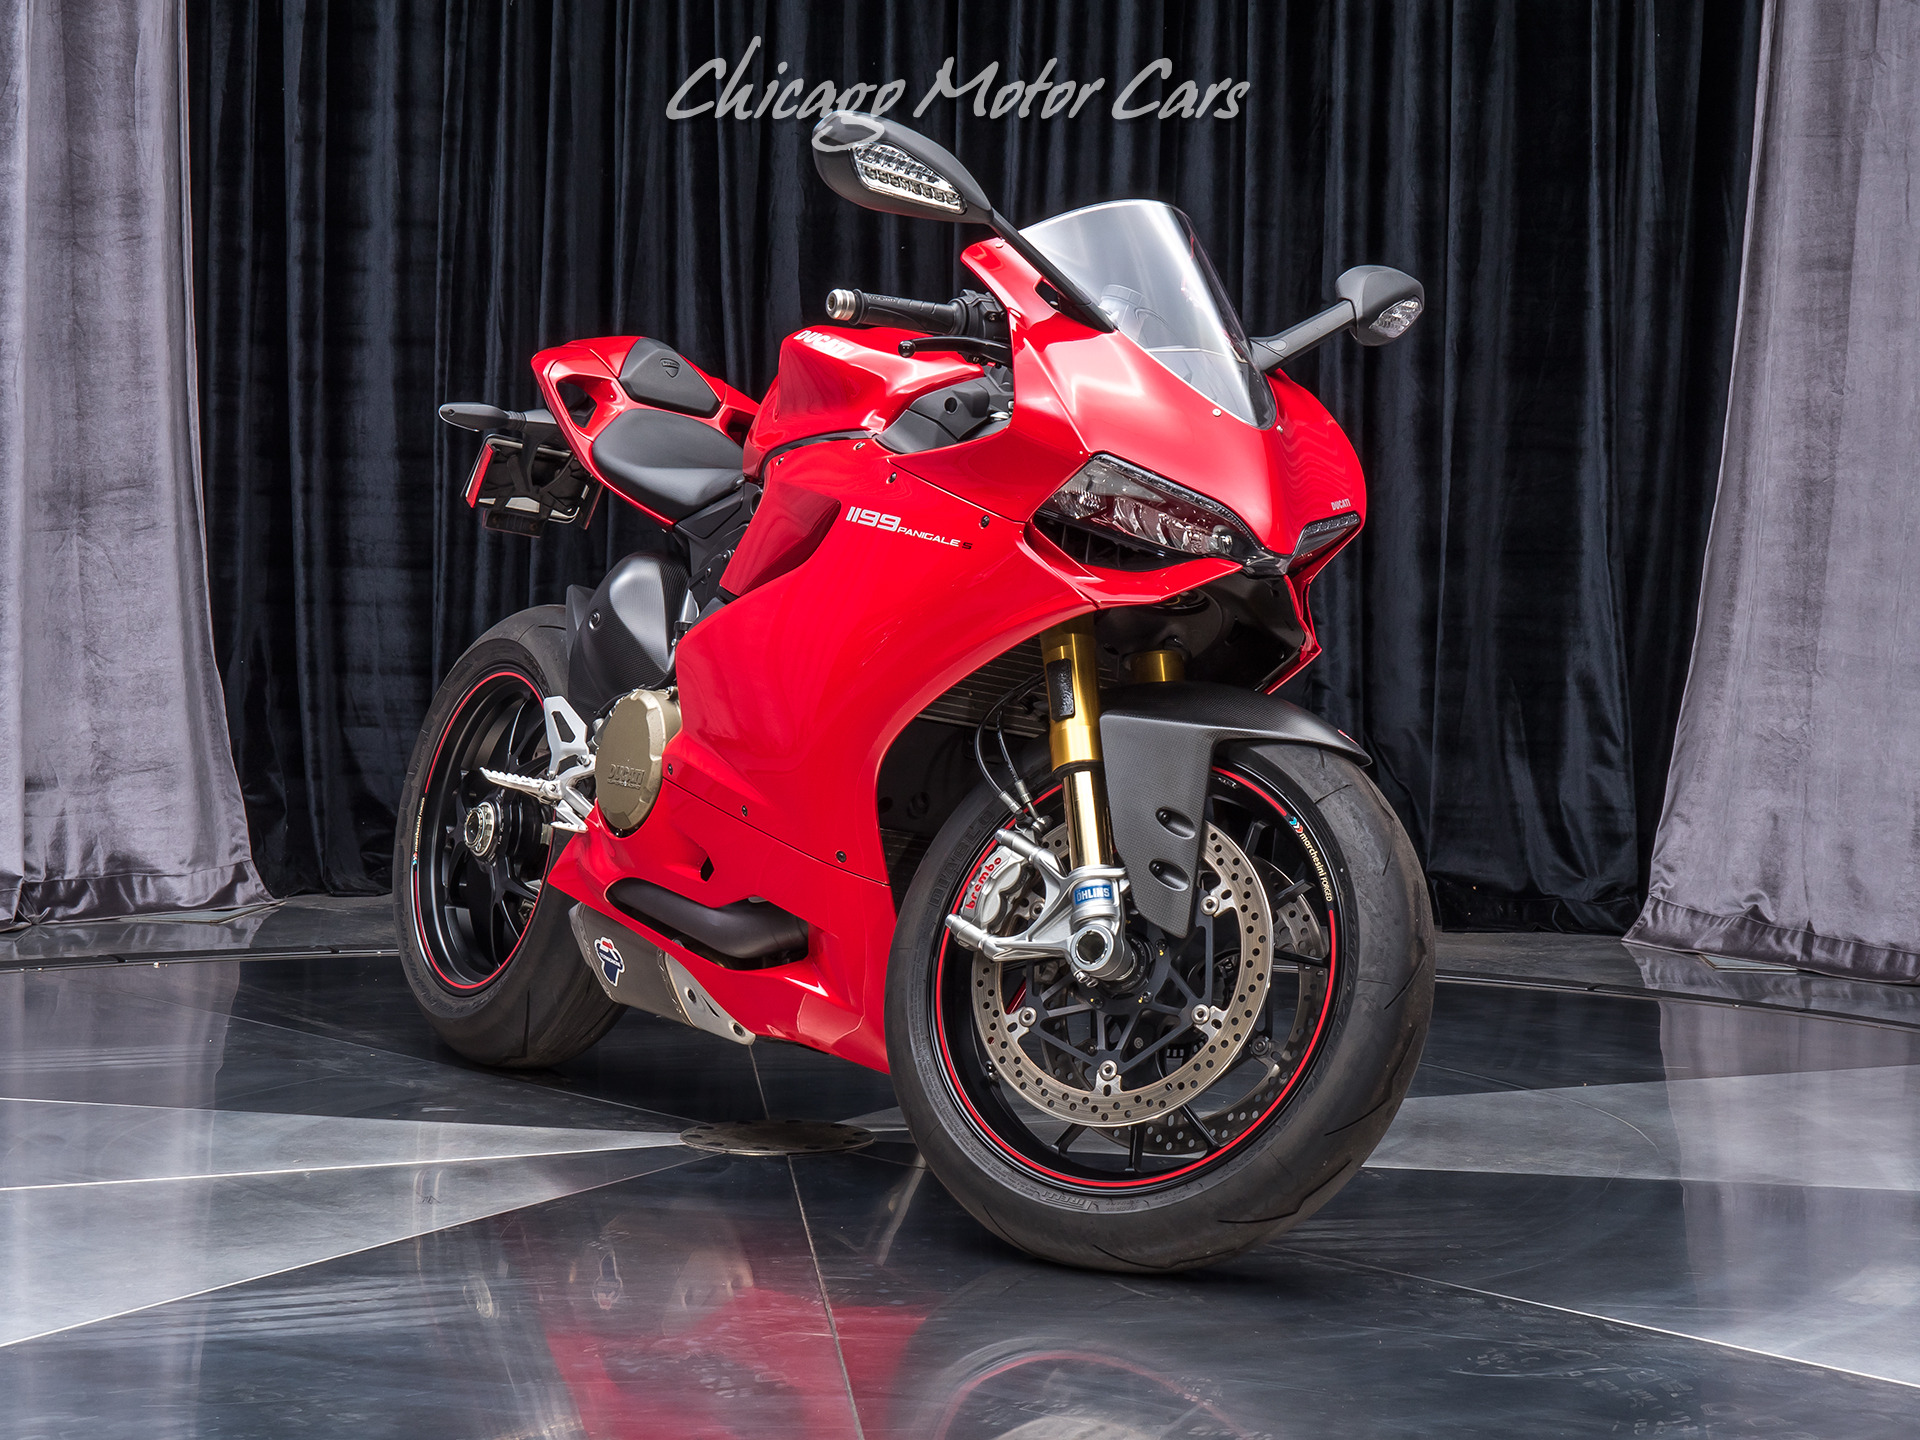 Used-2012-Ducati-1199-Panigale-S-Motorcycle